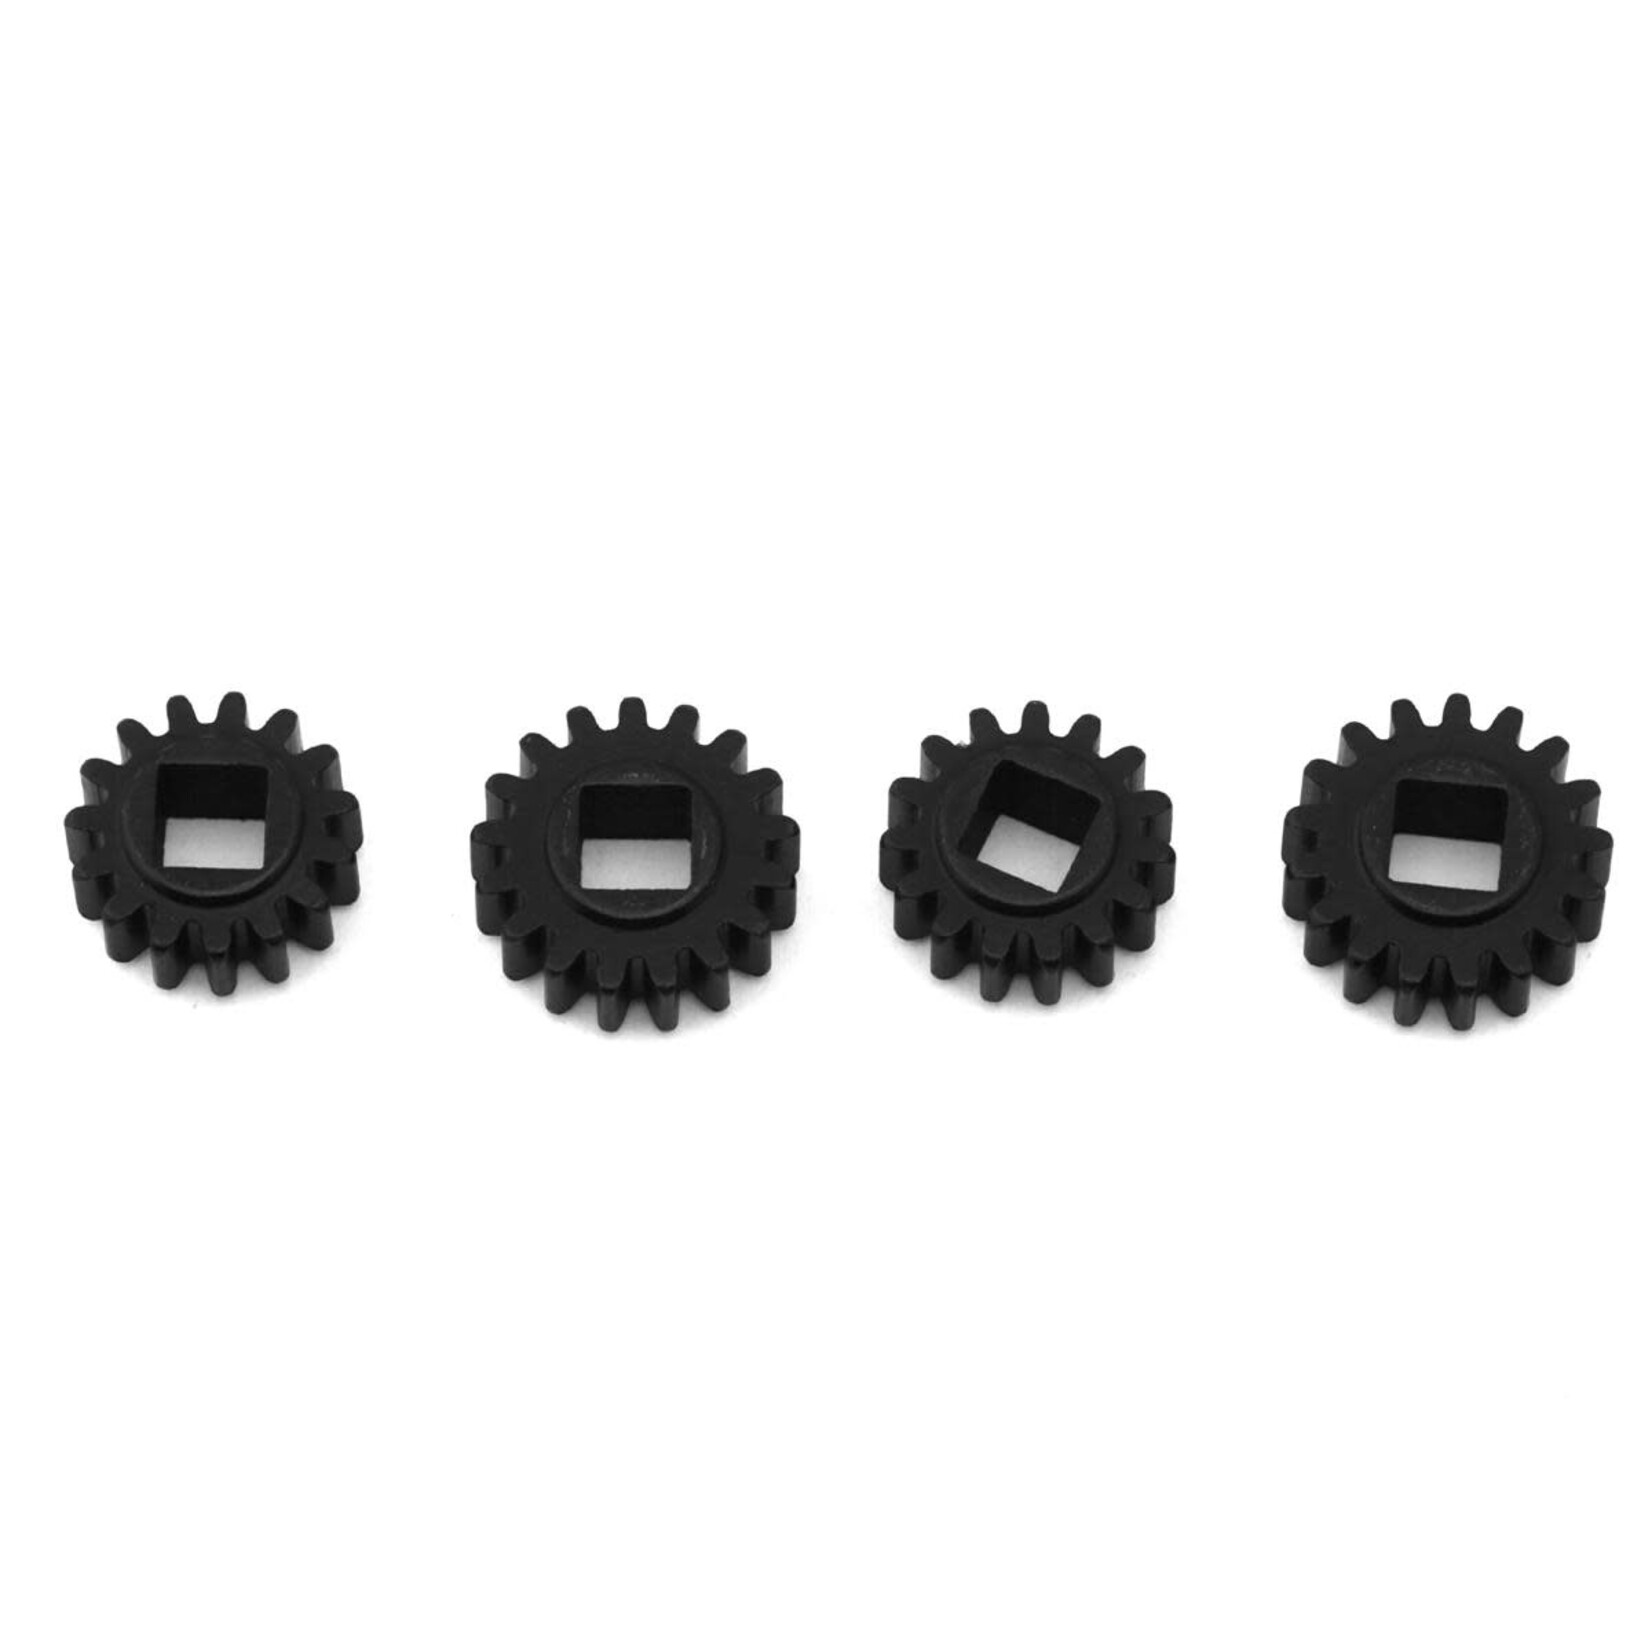 Treal Treal Hobby Axial SCX24 Hardened Steel Overdrive Portal Gears (15T/17T) #X003SD61JL